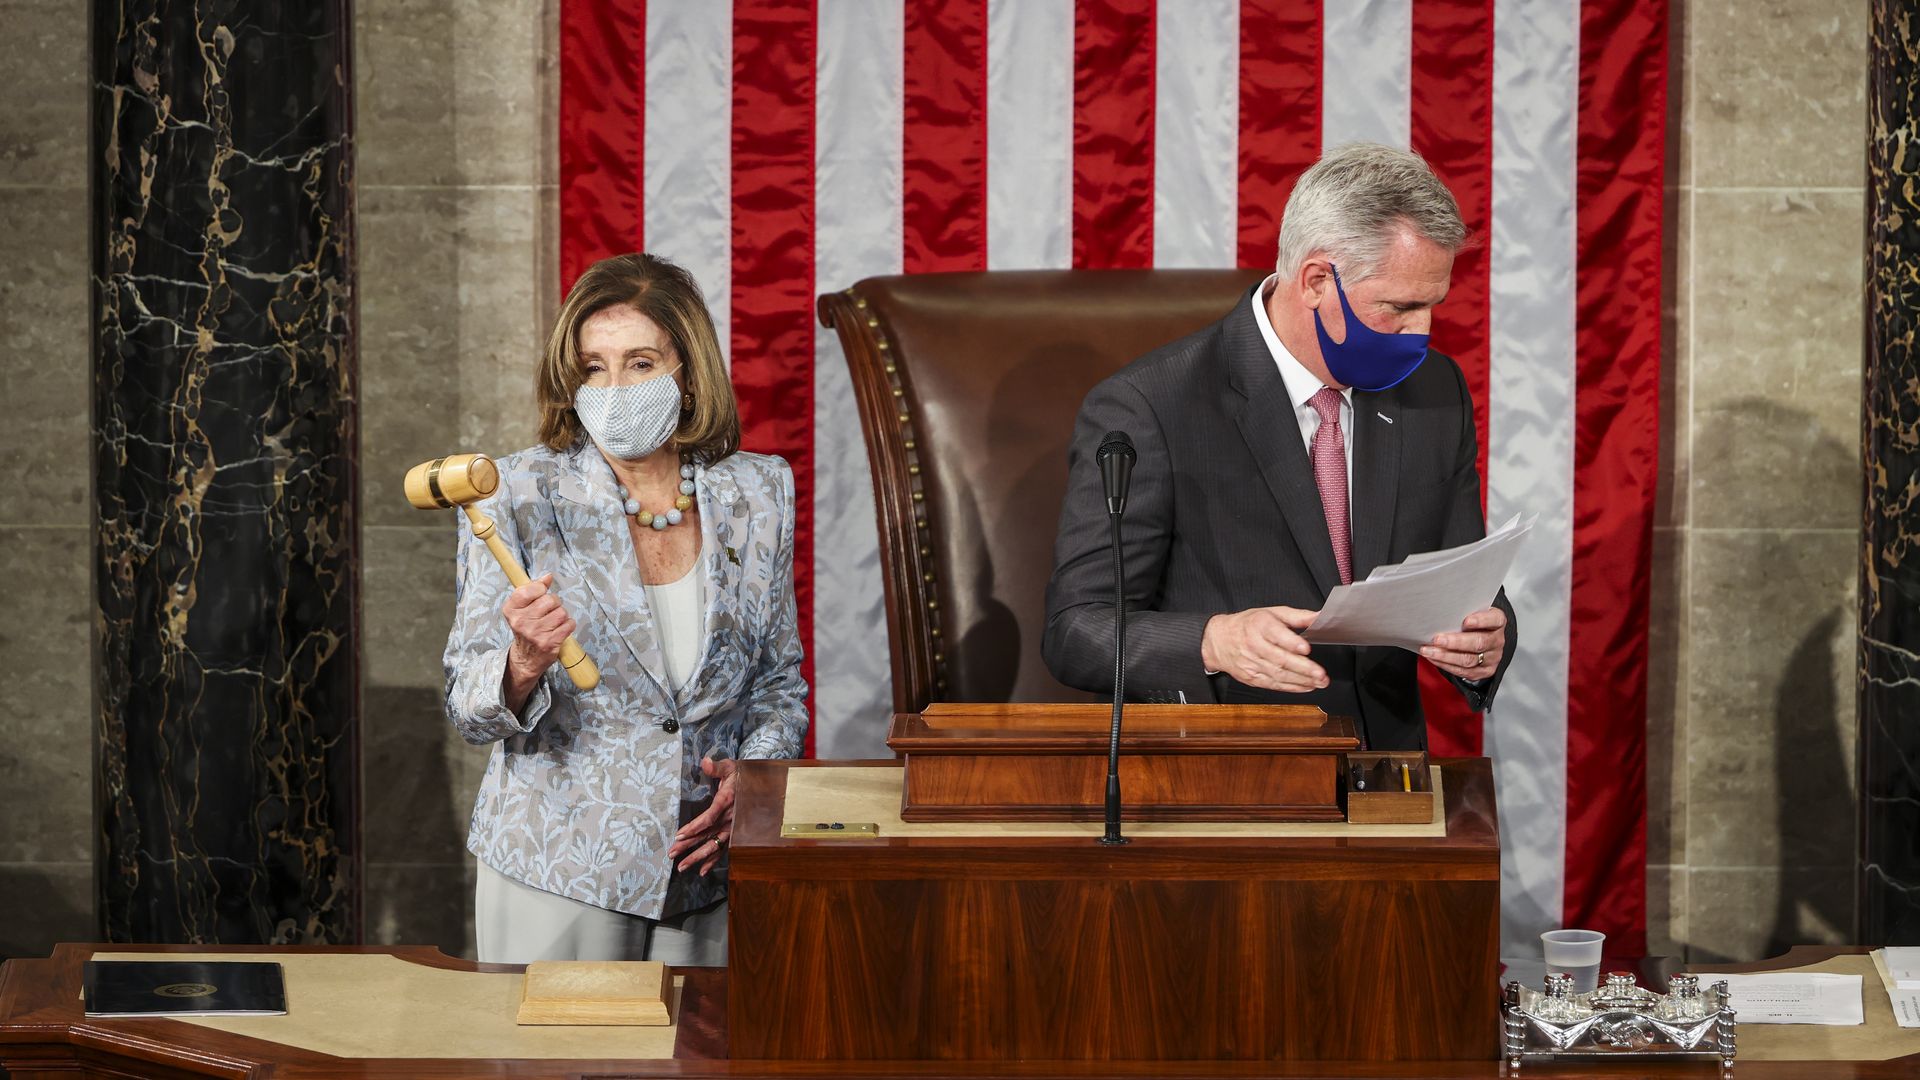 House Speaker Nancy Pelosi (D-Calif.) with House Minority Leader Kevin McCarthy (R-Calif.) in the Capitol in January 2021.